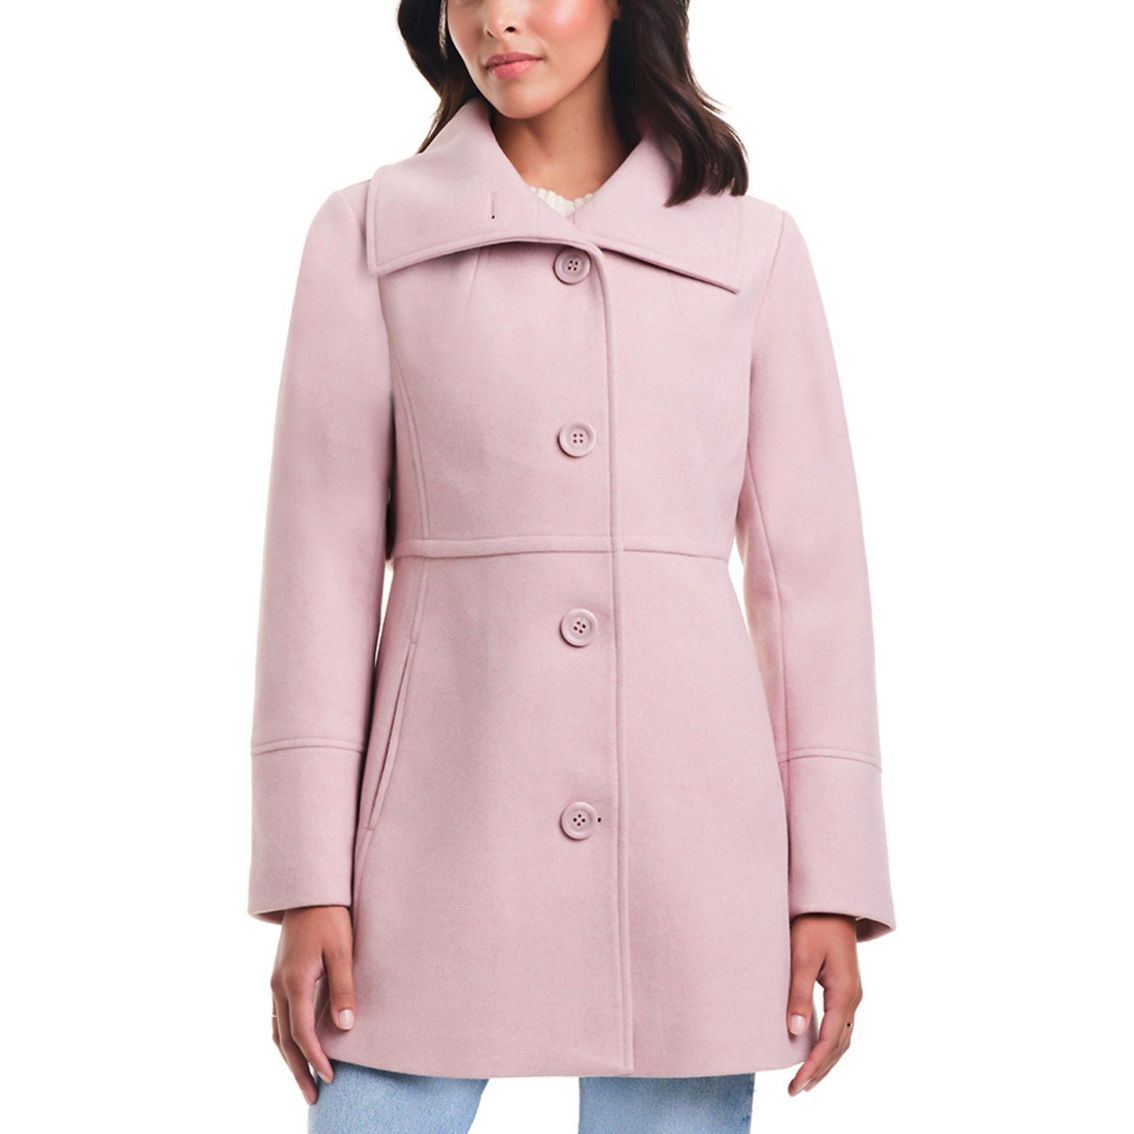 Details 32 In. Faux Wool Coat | Coats | Clothing & Accessories | Shop ...